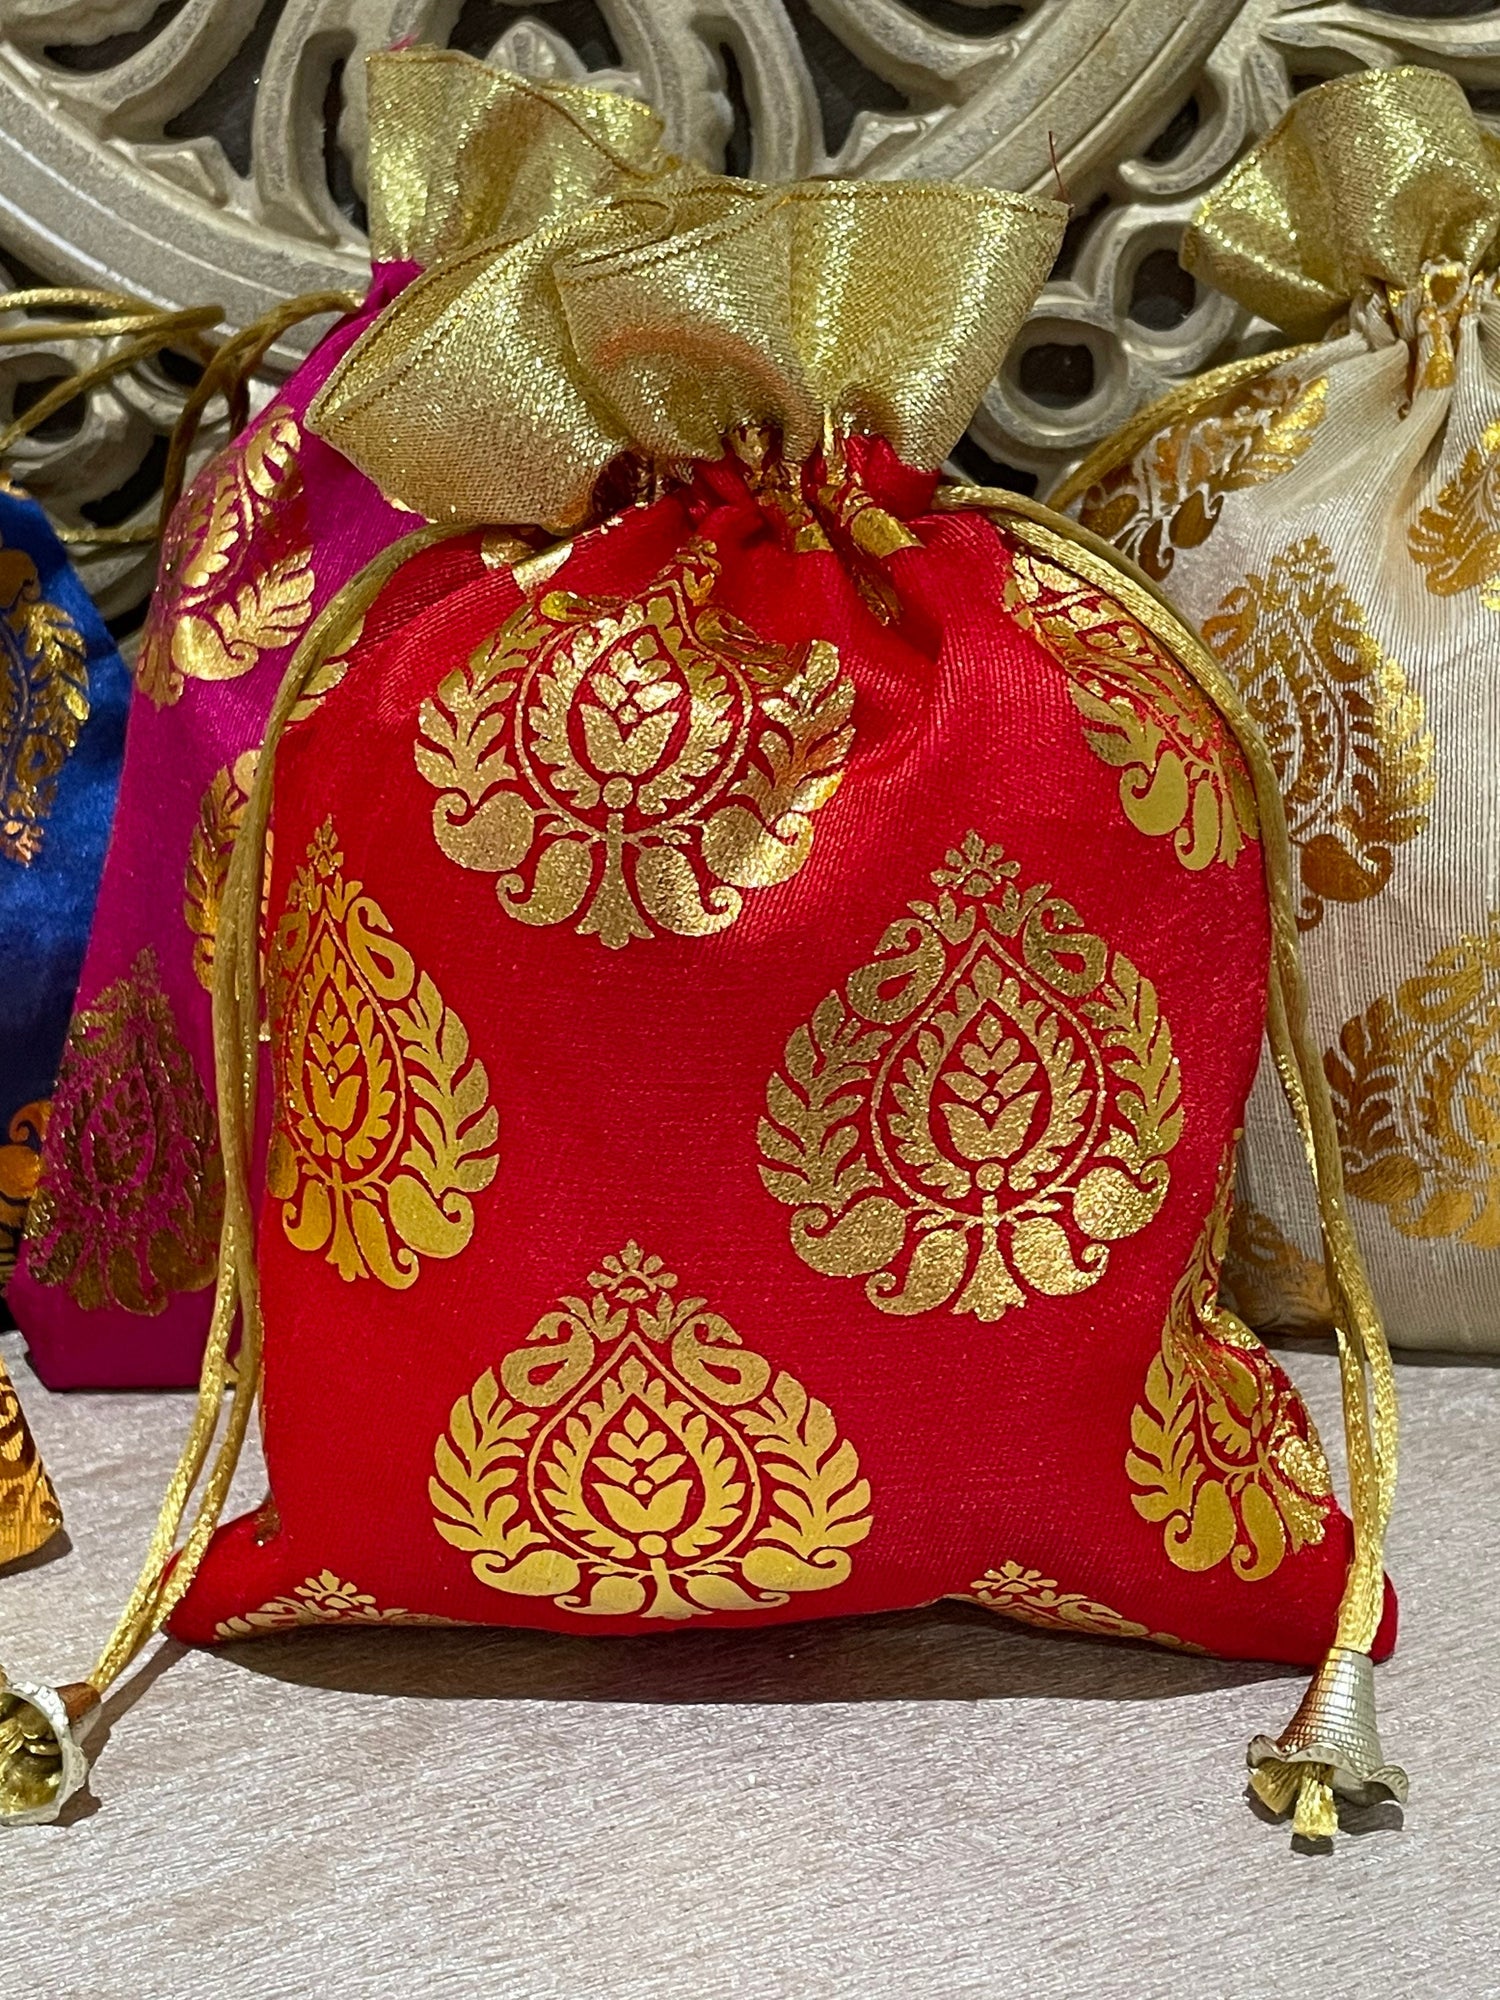 Lohri gift idea | Gifts, Gift hampers, Gift wrapping